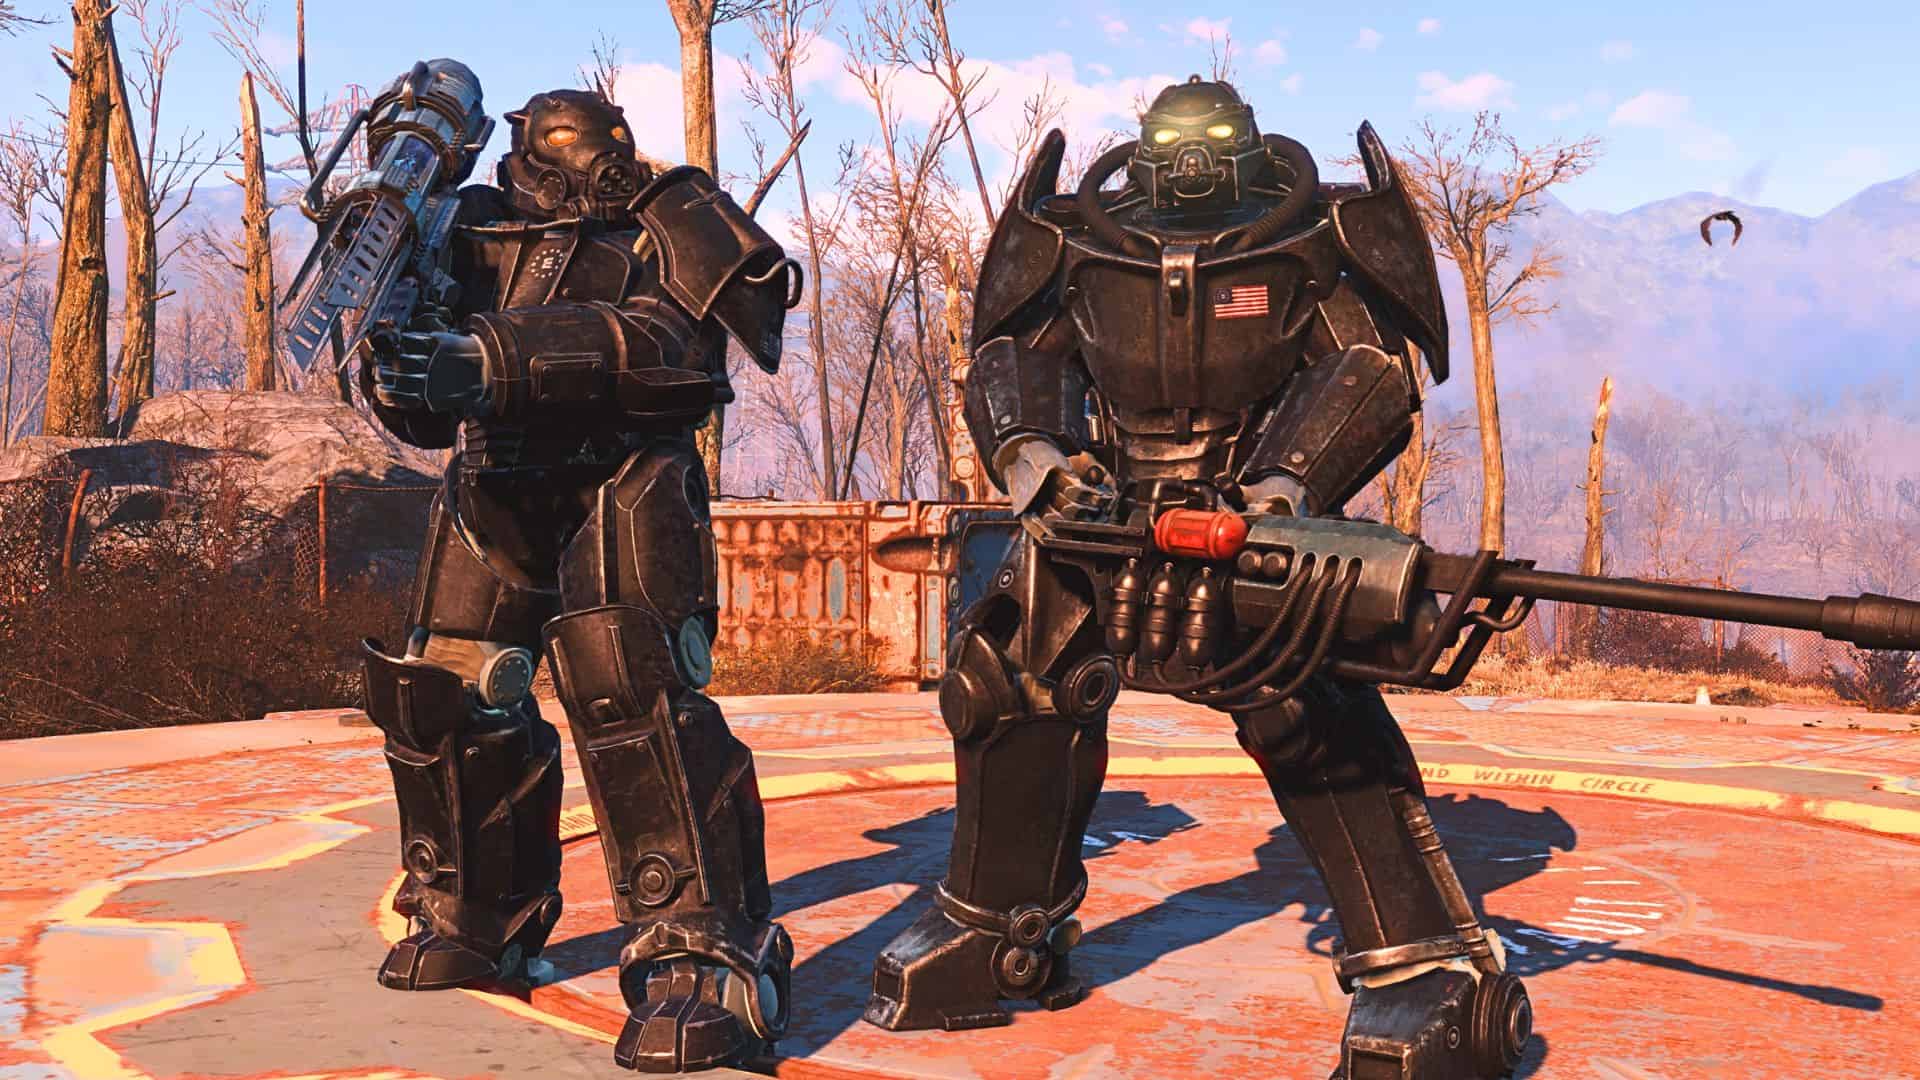 What’s included in the Fallout 4 next-gen update? All new content explained